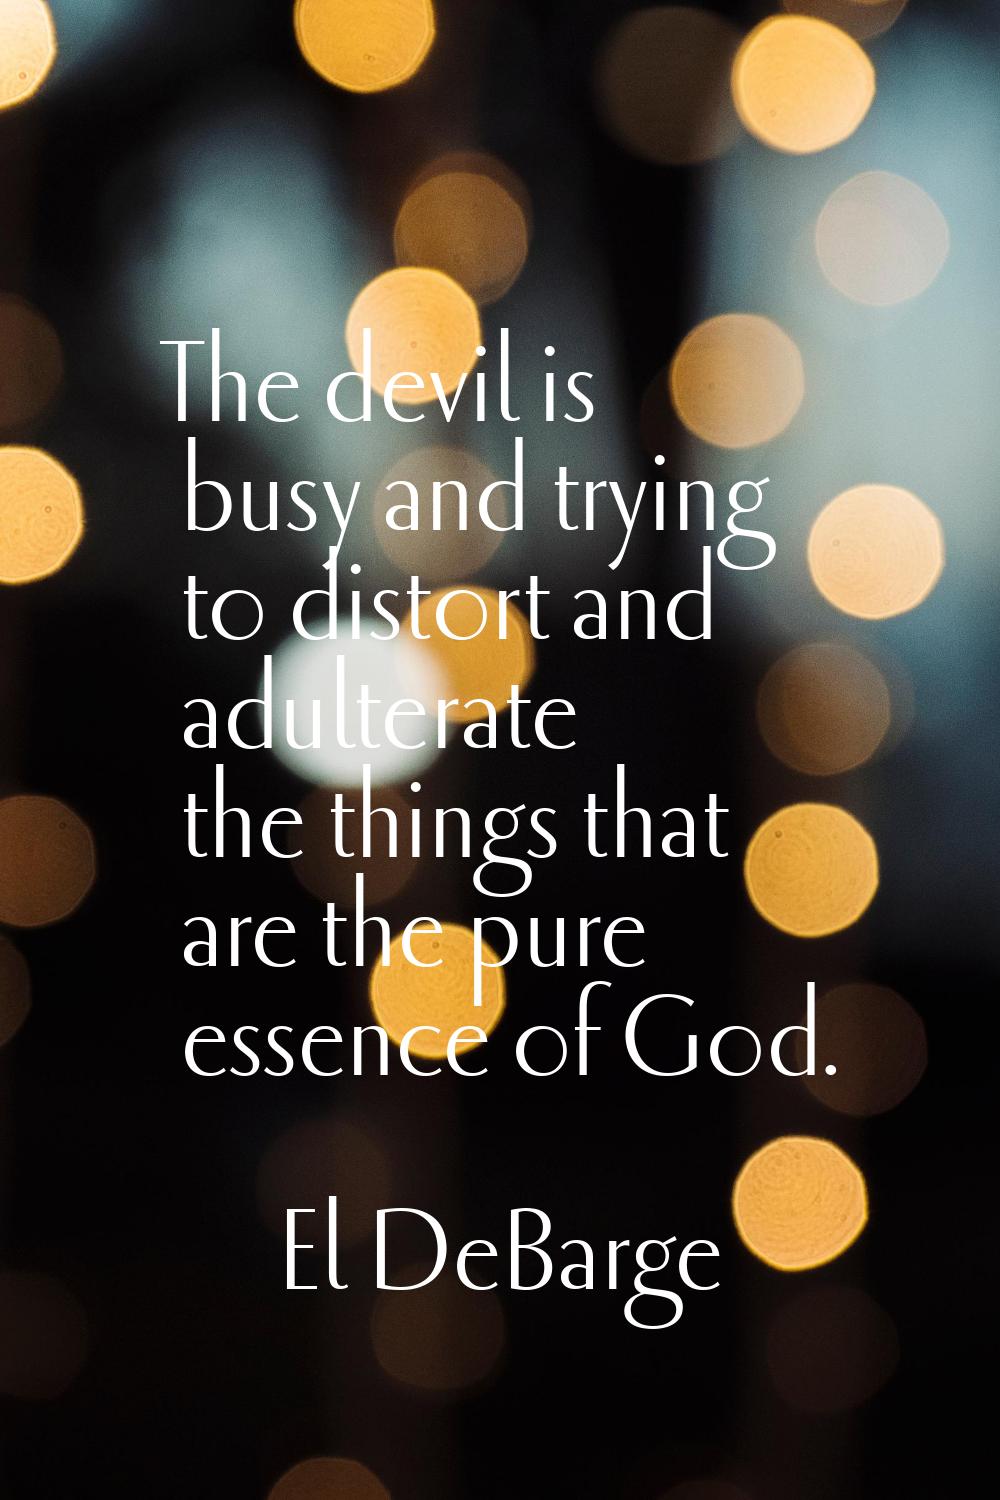 The devil is busy and trying to distort and adulterate the things that are the pure essence of God.